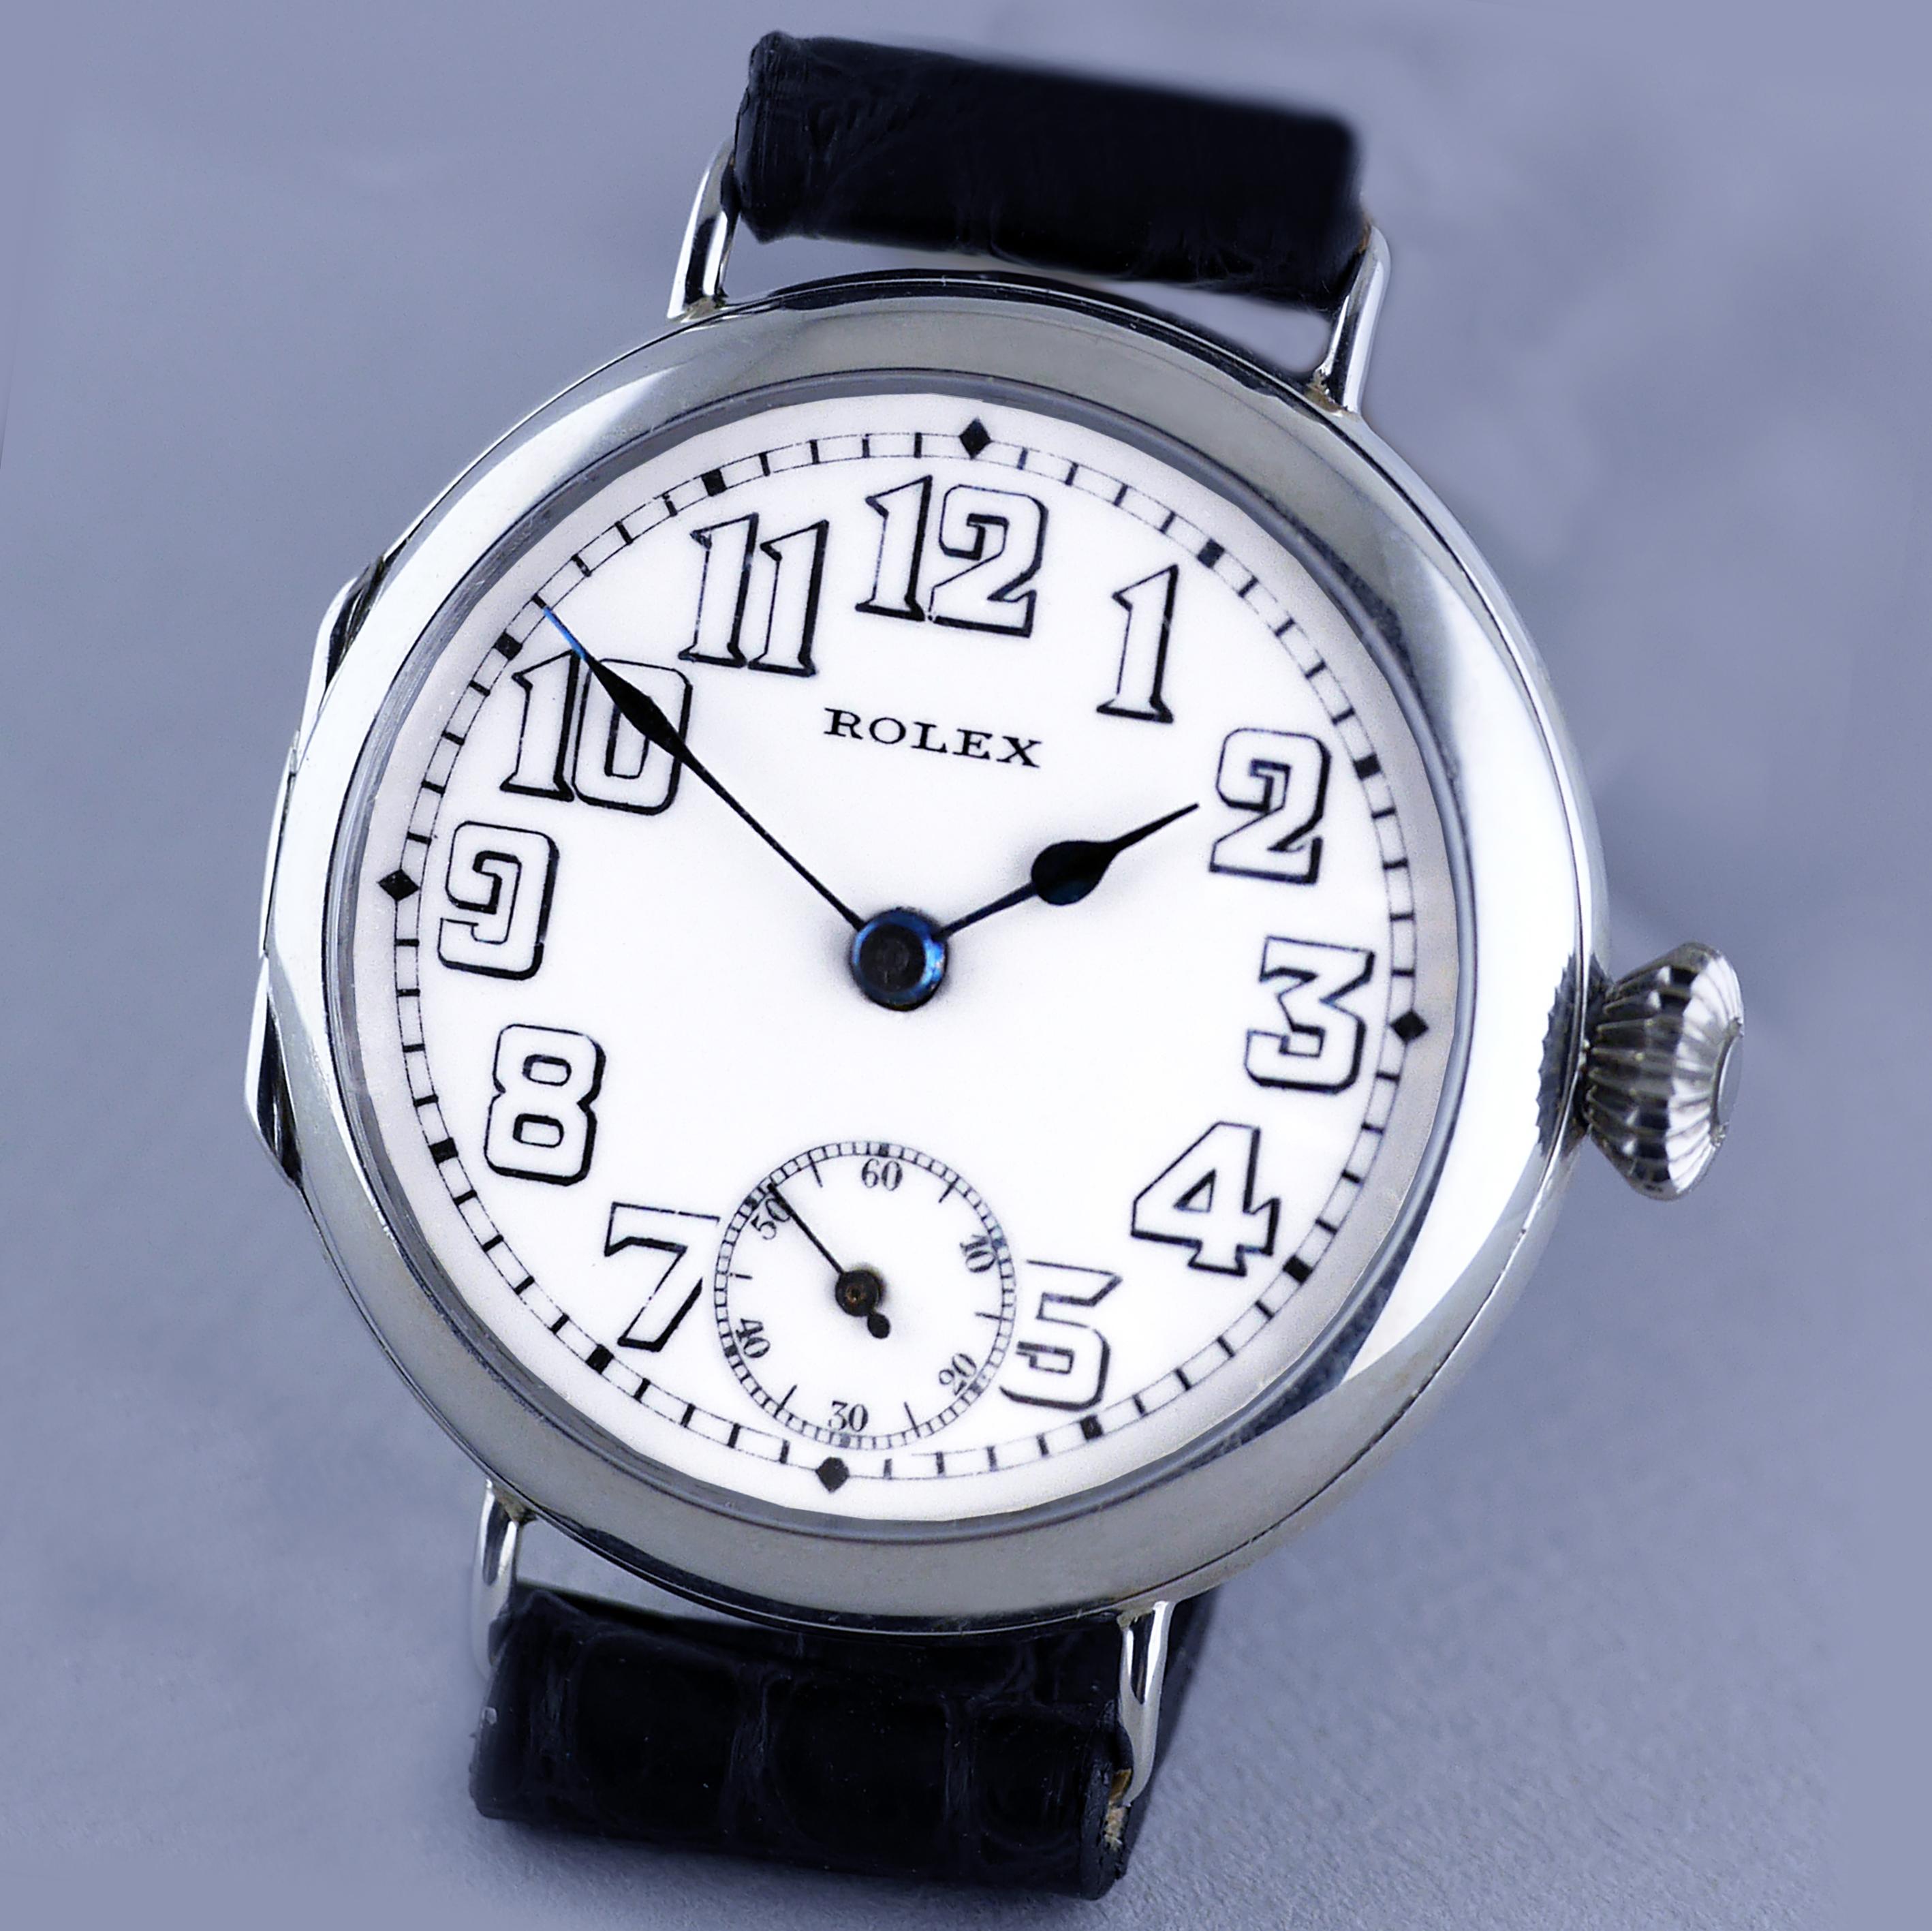 A rare vintage Officers wristwatch by Rolex made in 1916.

Sterling Silver round case with hinged bezel and back, hallmarked for London Import into the United Kingdom in 1916.

15-Jewel Rolex movement.

White enamel dial with black period Arabic